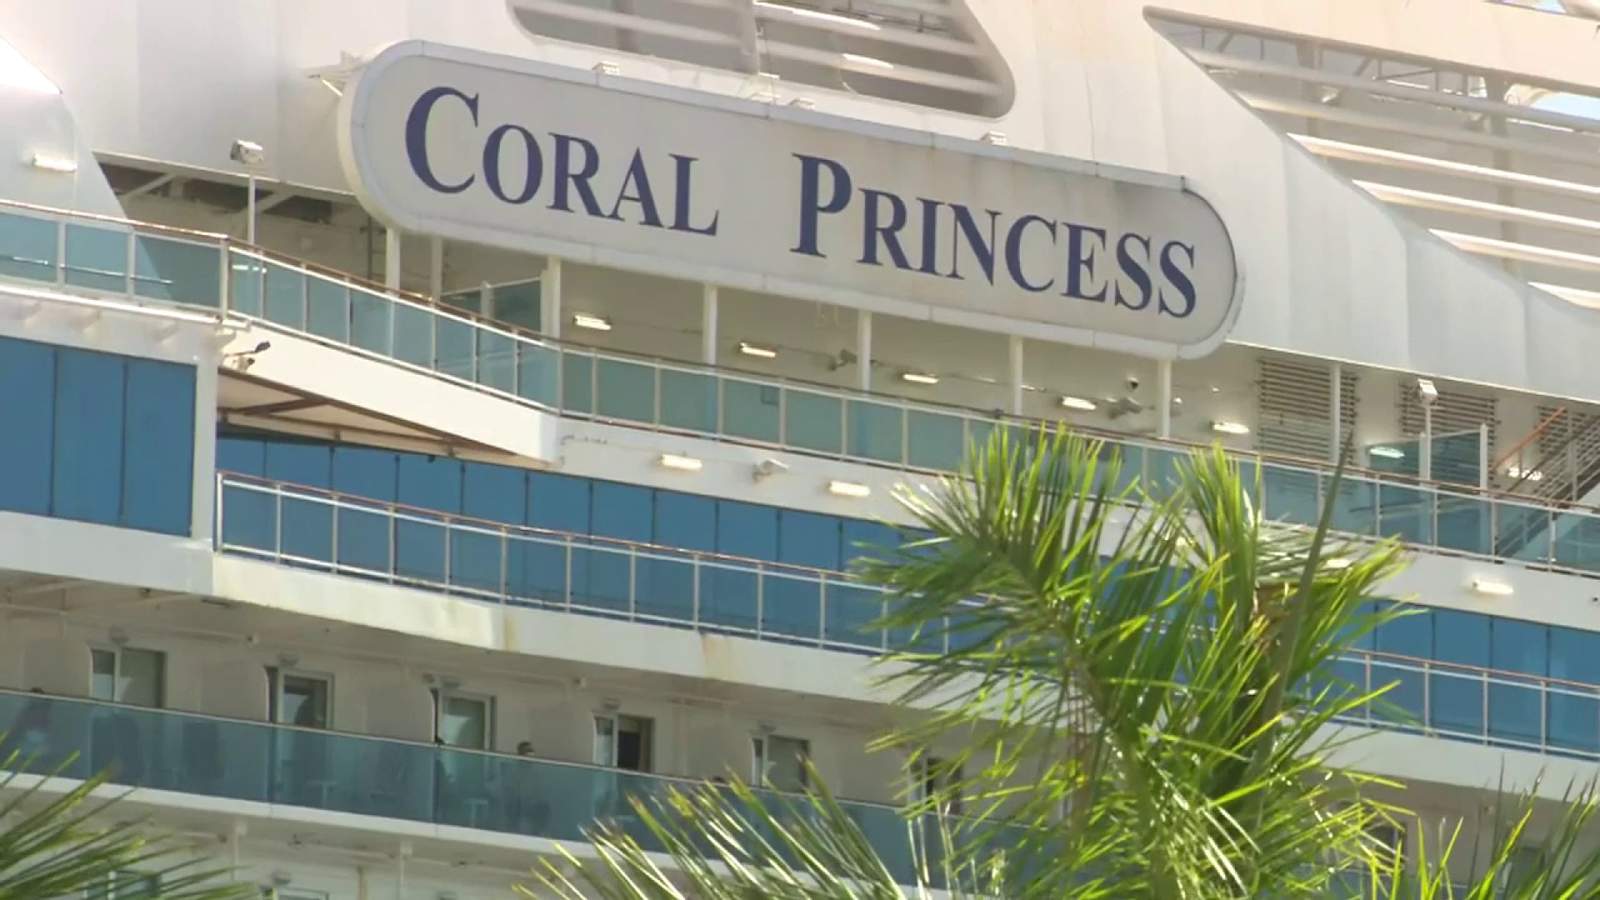 65 crew and passengers remain quarantined aboard ship in Port Miami